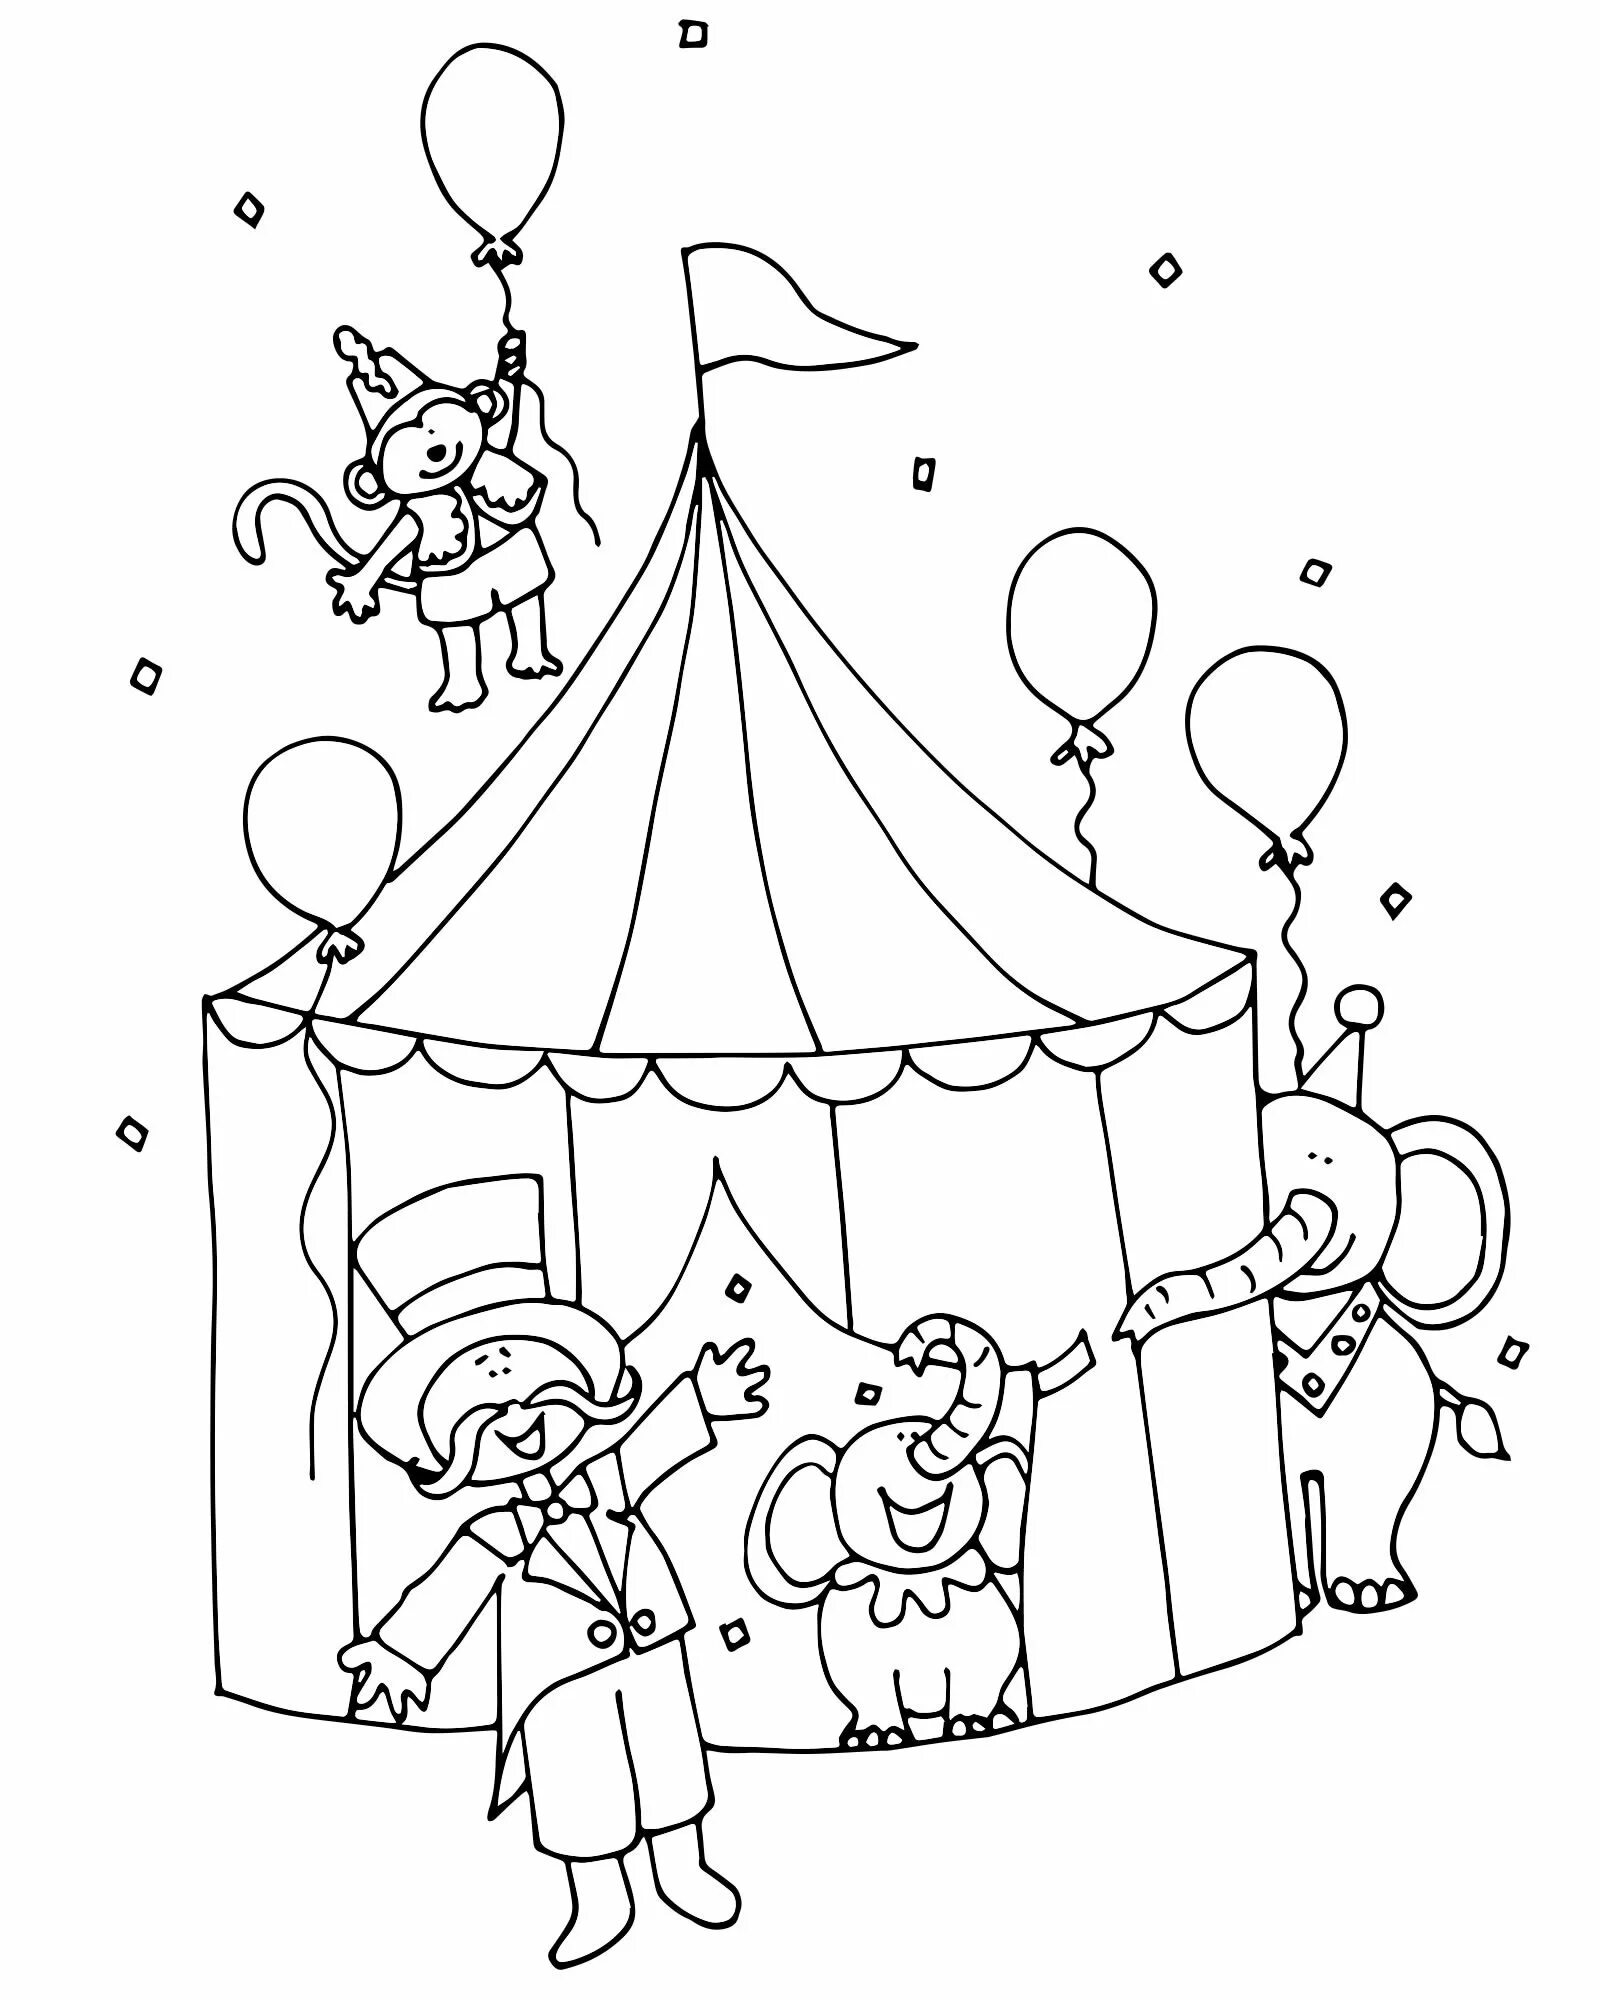 Coloring page dazzling puppet theater